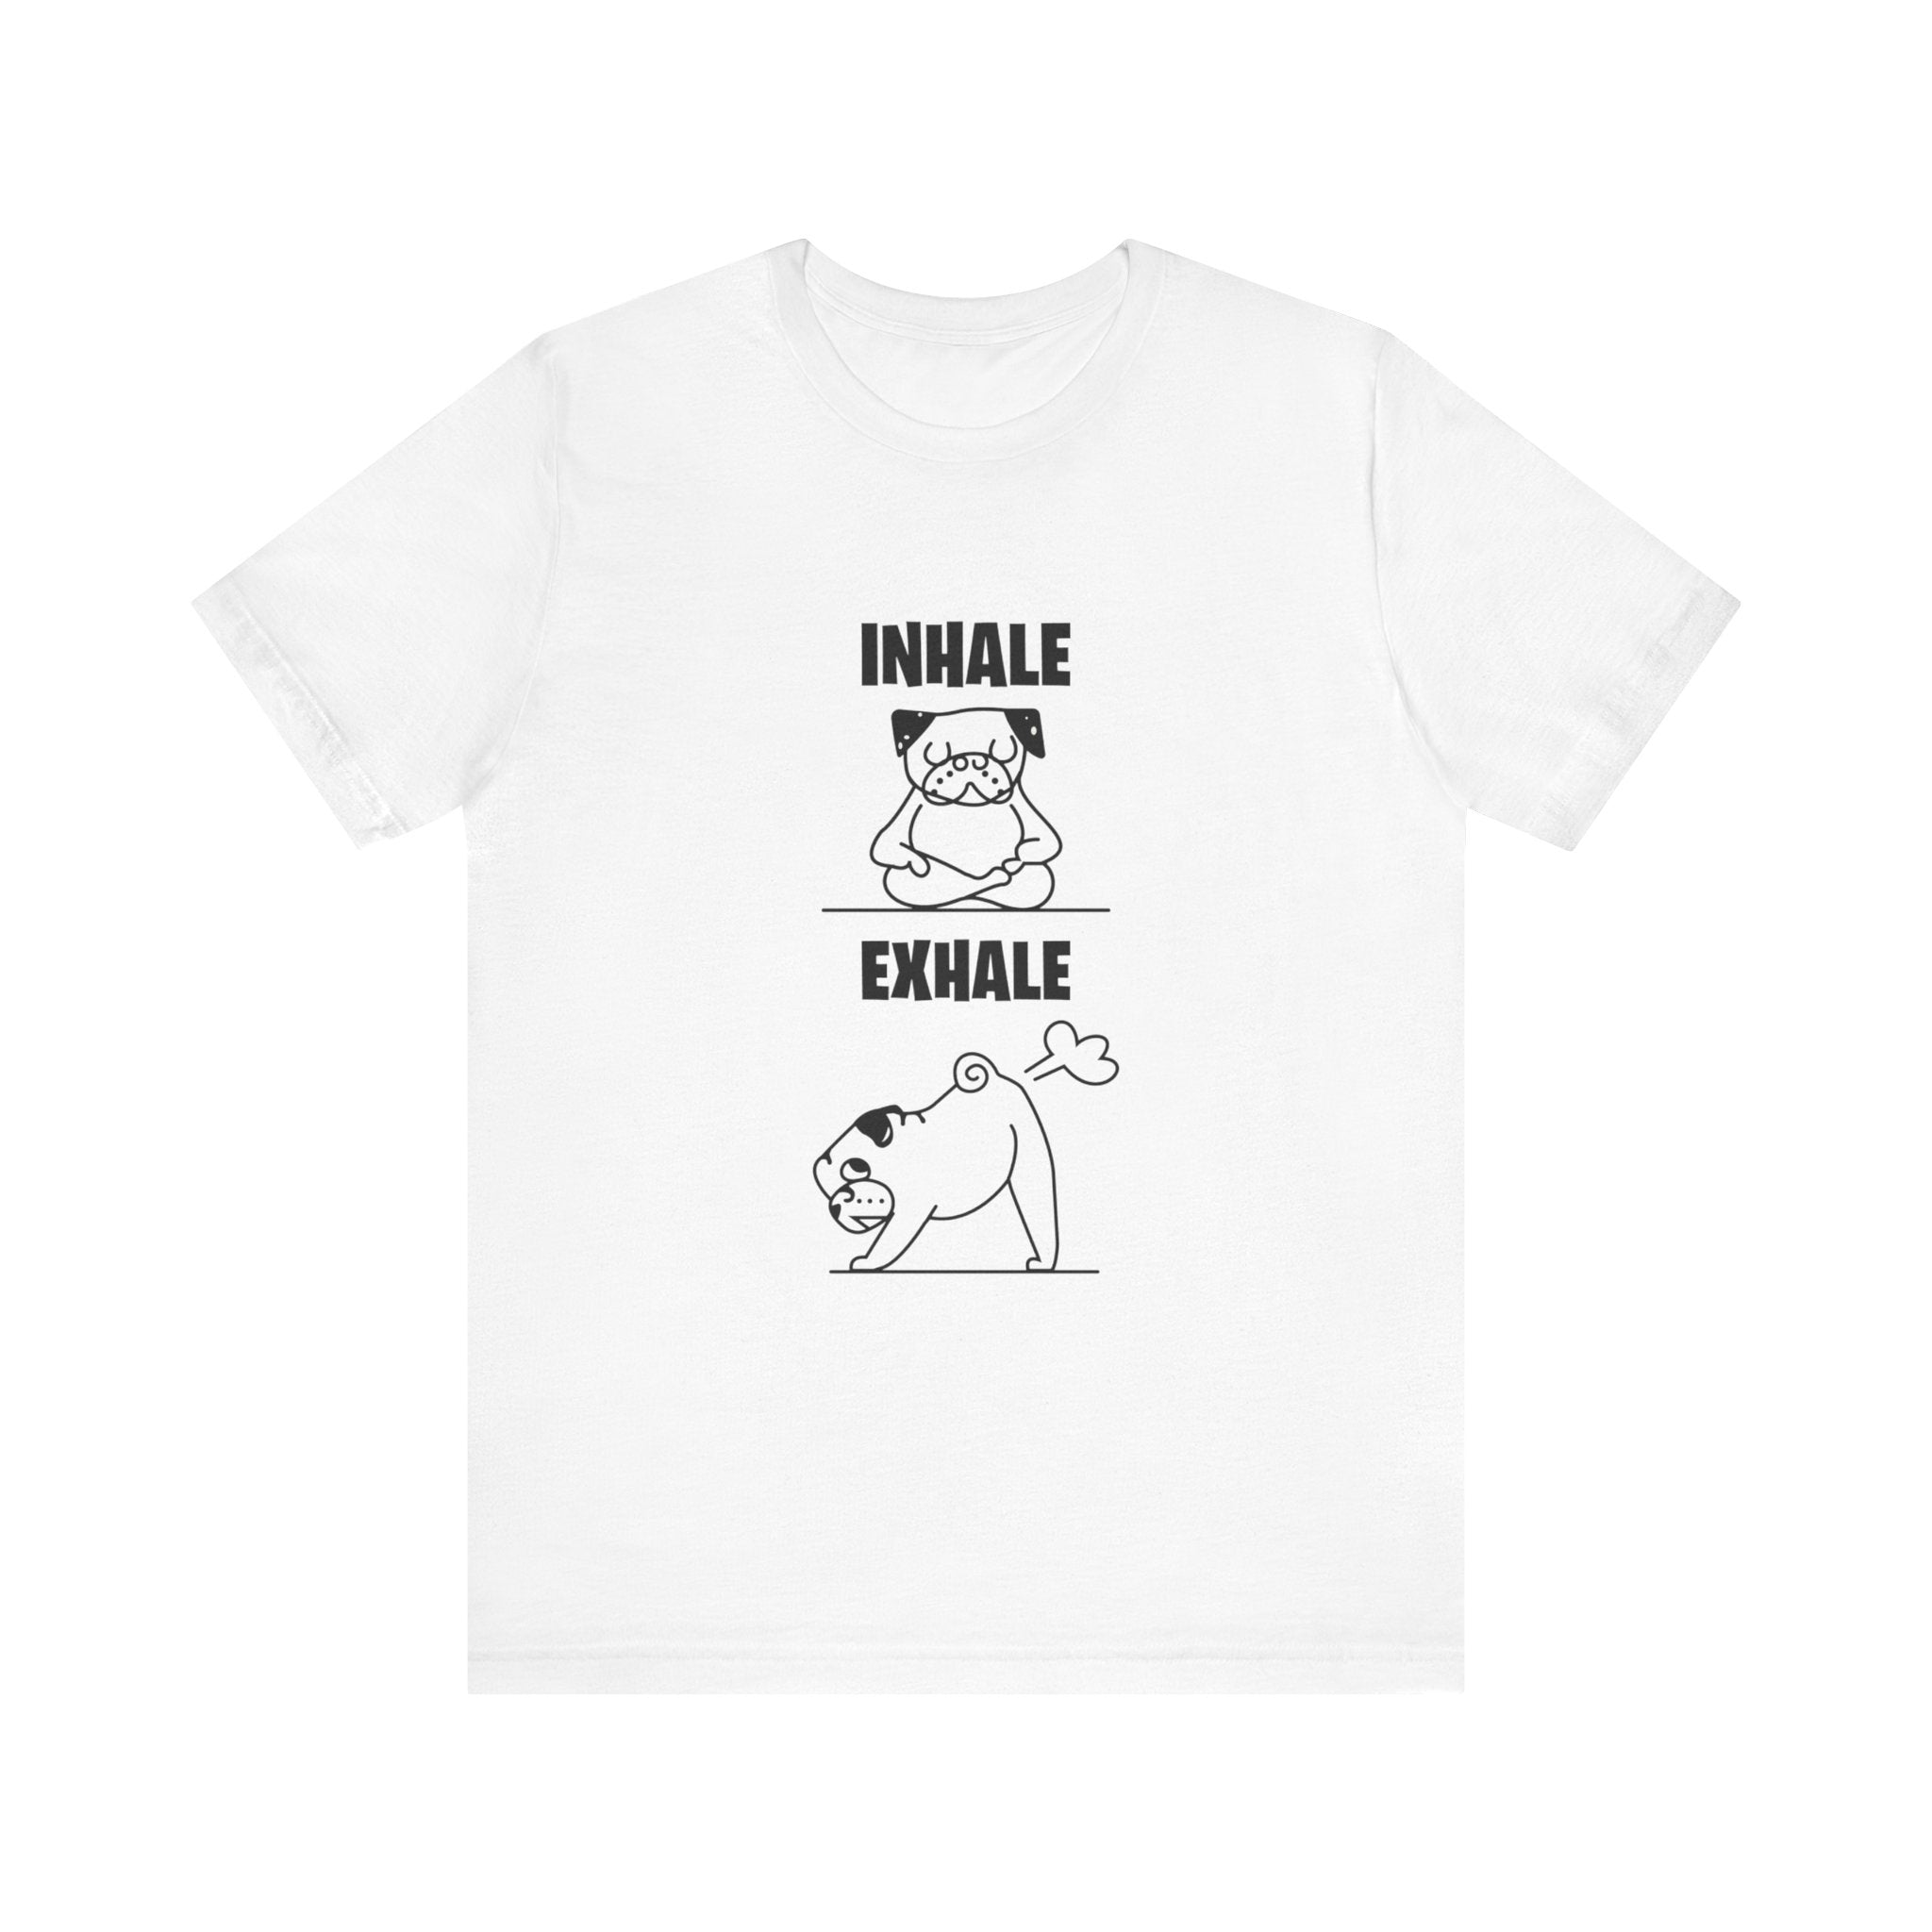 Unisex white t-shirt with a quality print of a cartoon cat and Dog Funny T shirt in yoga poses above the words "inhale" and "exhale" respectively.